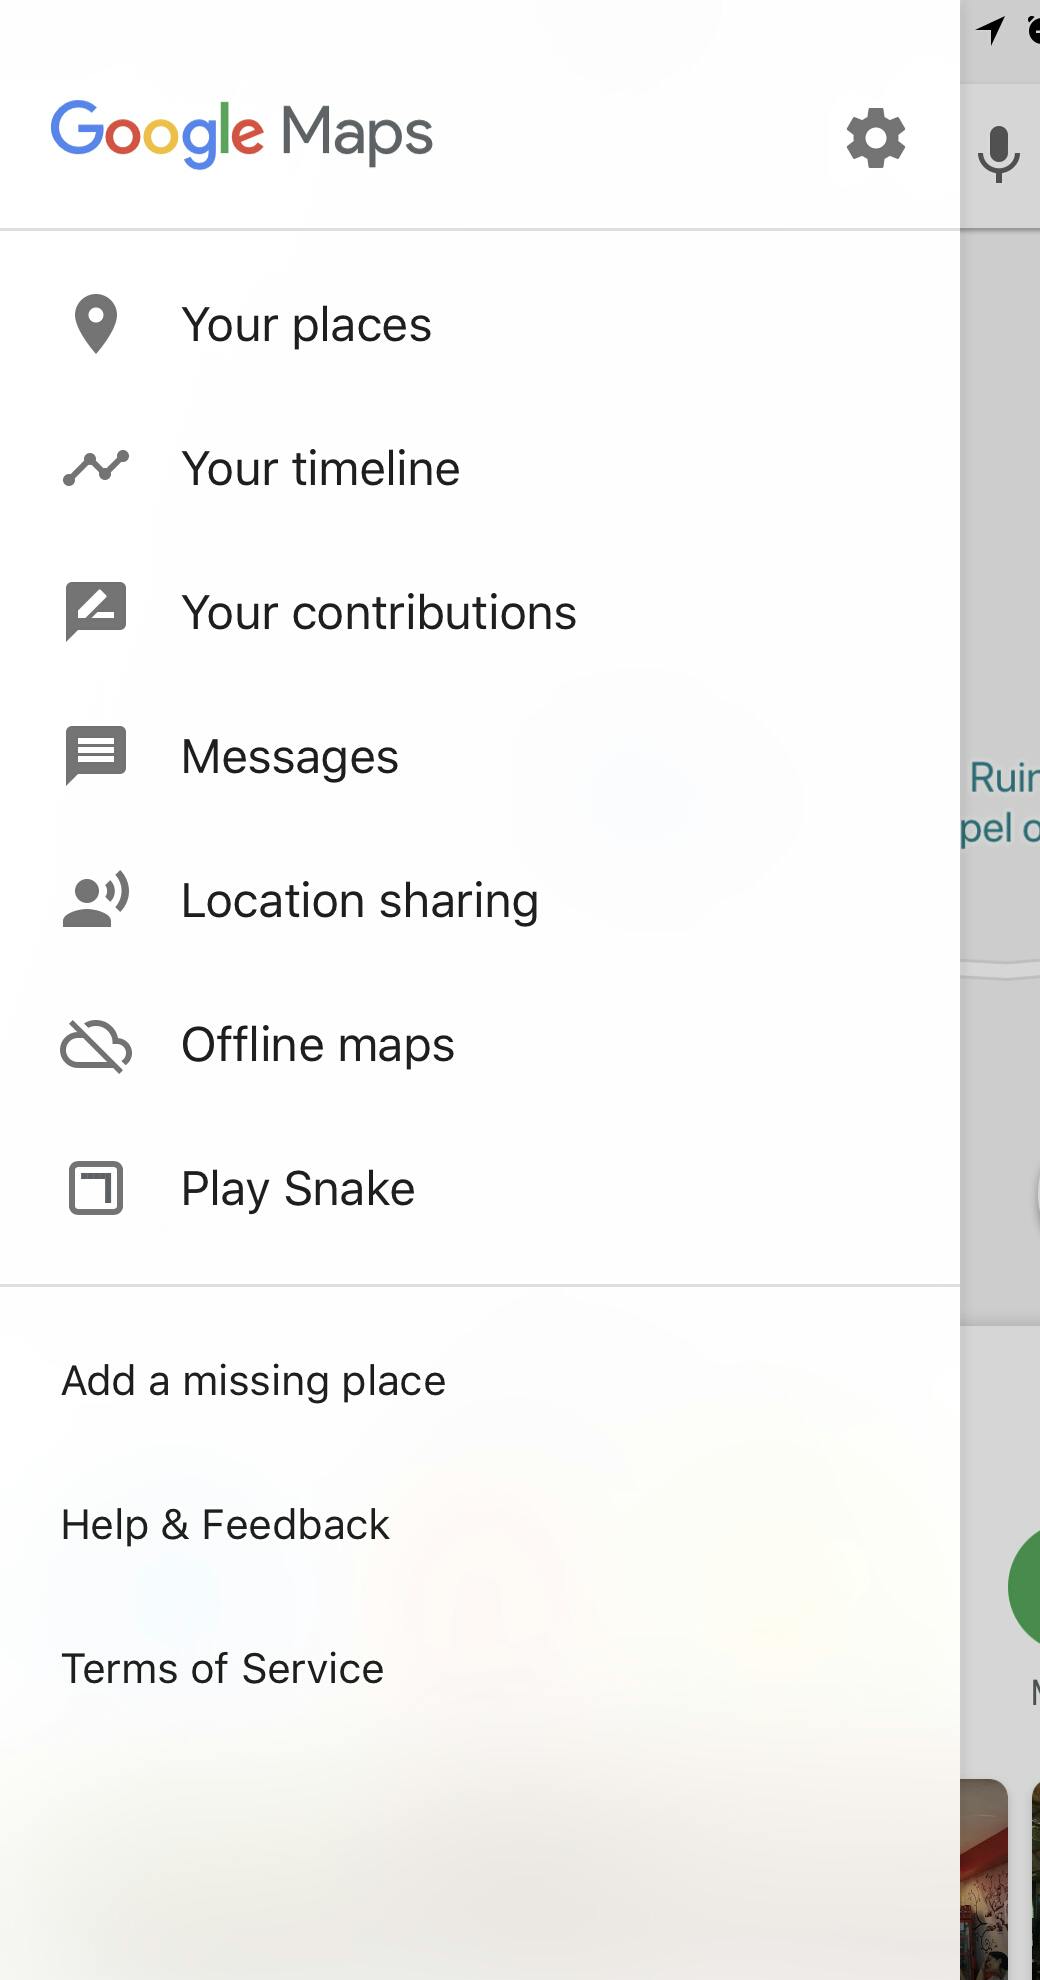 Snake Gets Added To Google Maps